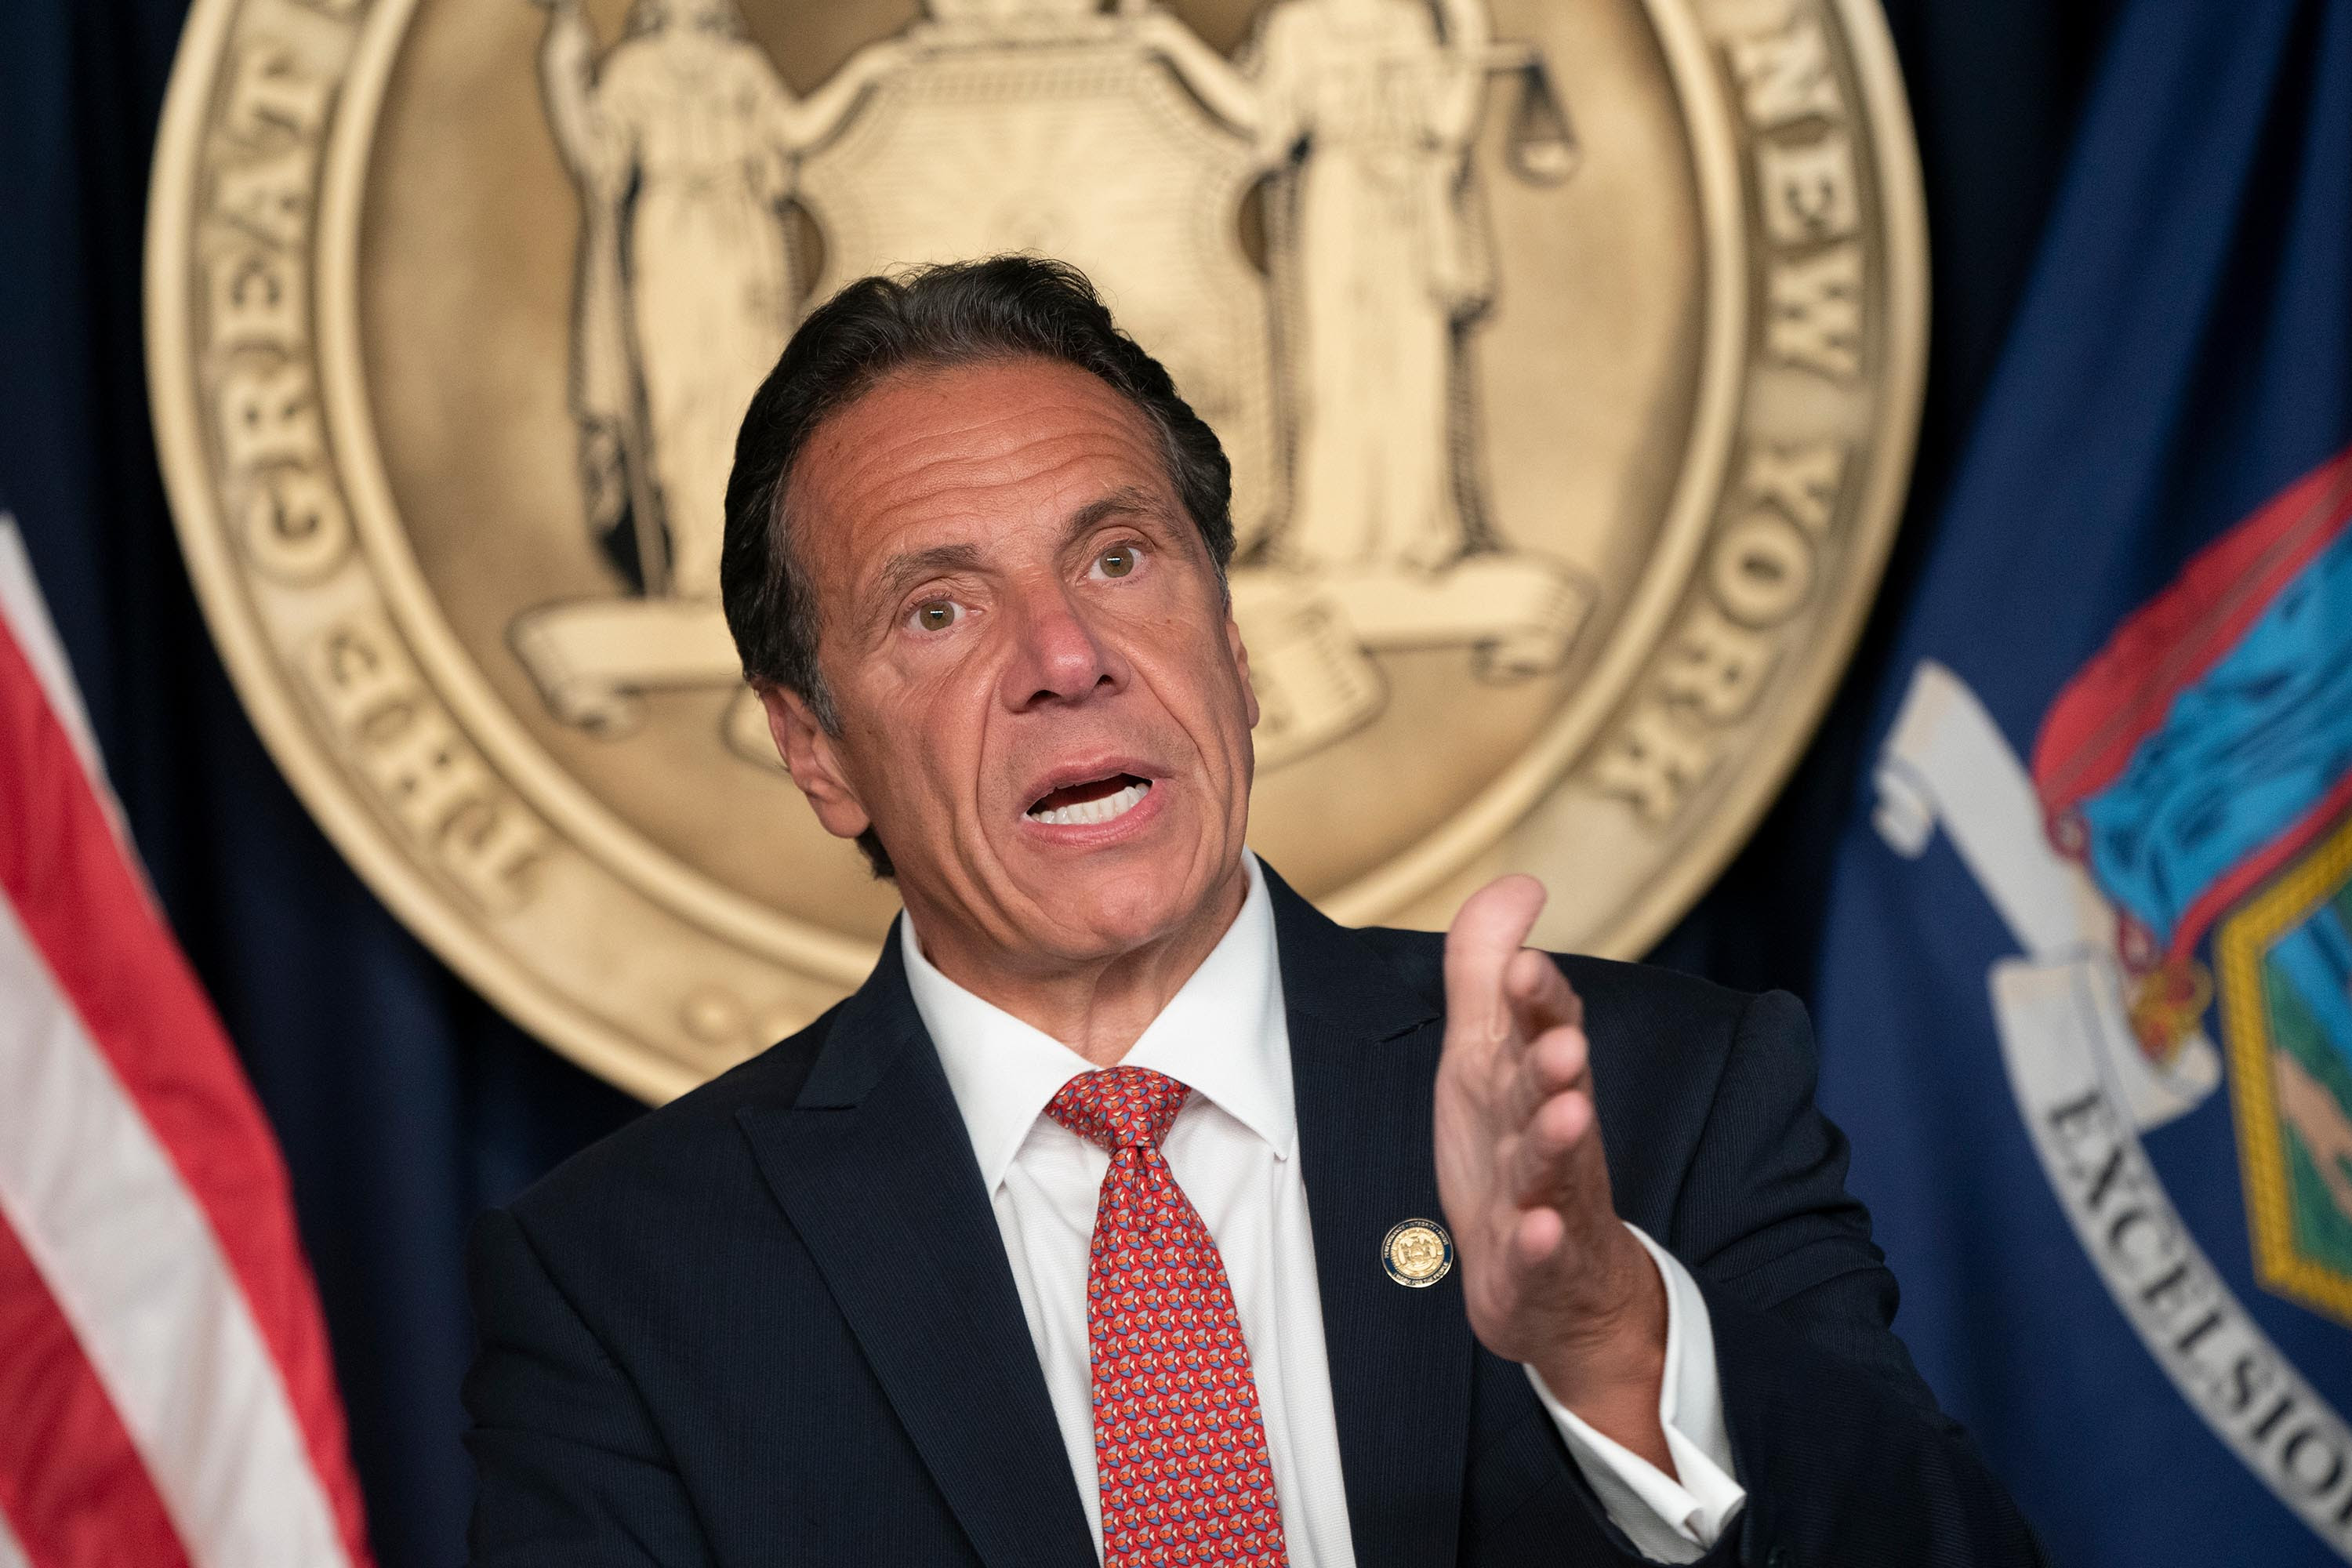 Will Governor Andrew Cuomo be impeached? Experts say it’s not a matter of if, but when